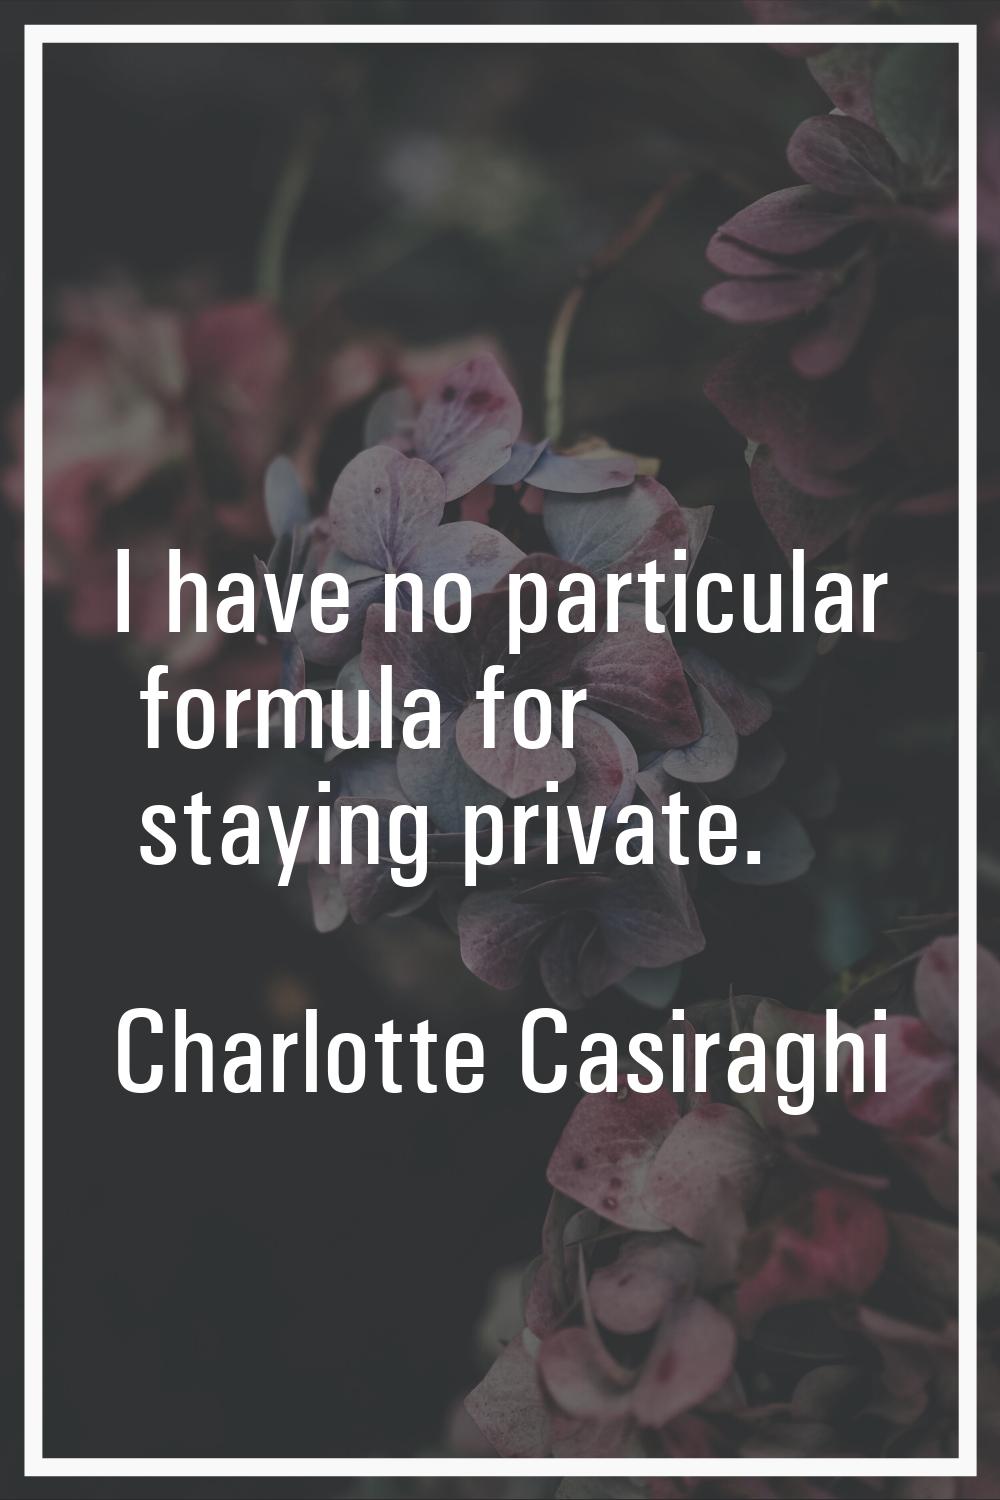 I have no particular formula for staying private.